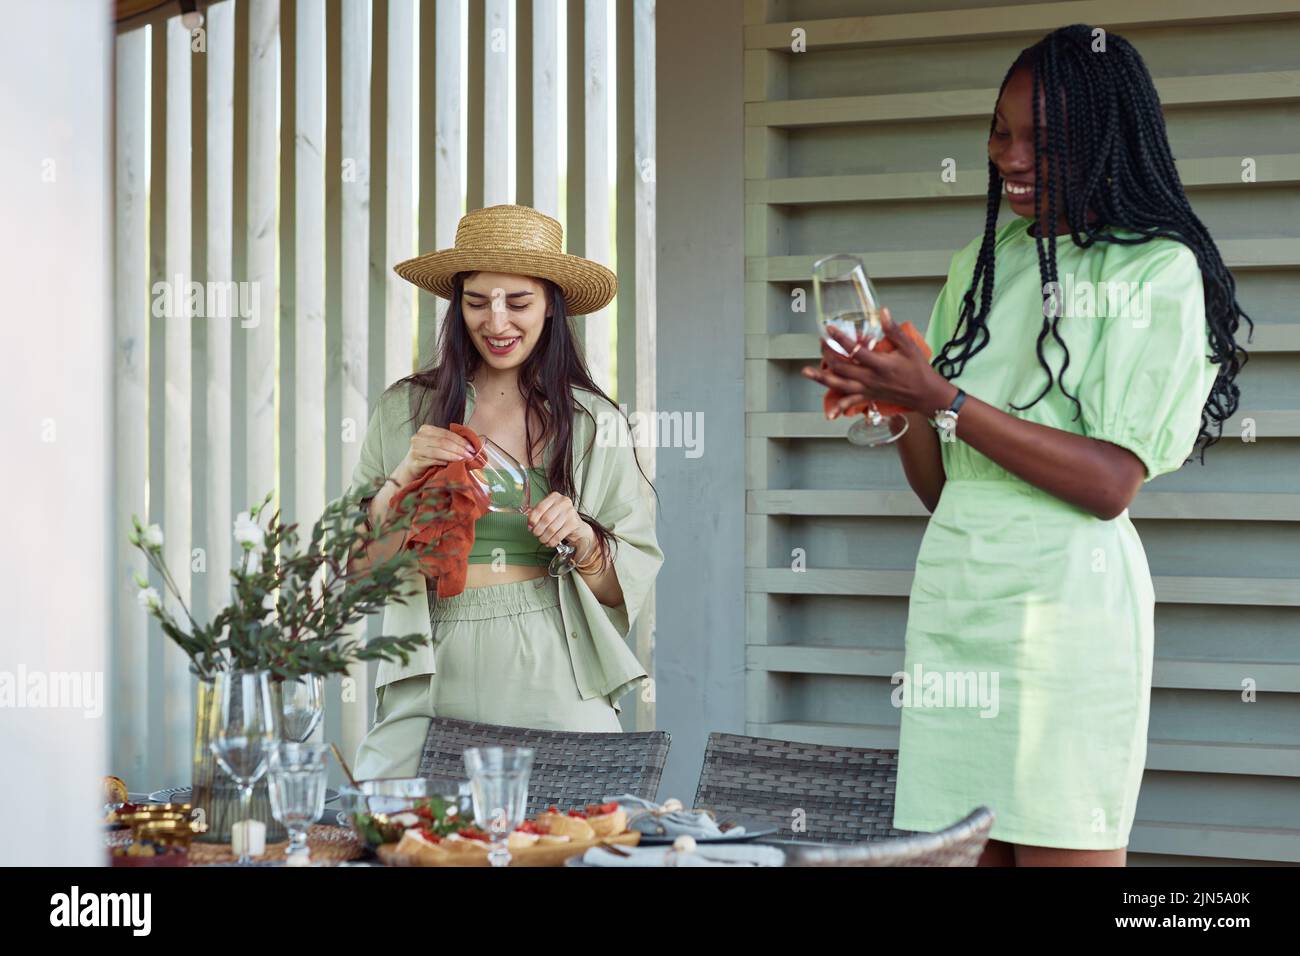 Waist up portrait of two young women setting up dinner table for party with friends outdoors in muted green color Stock Photo